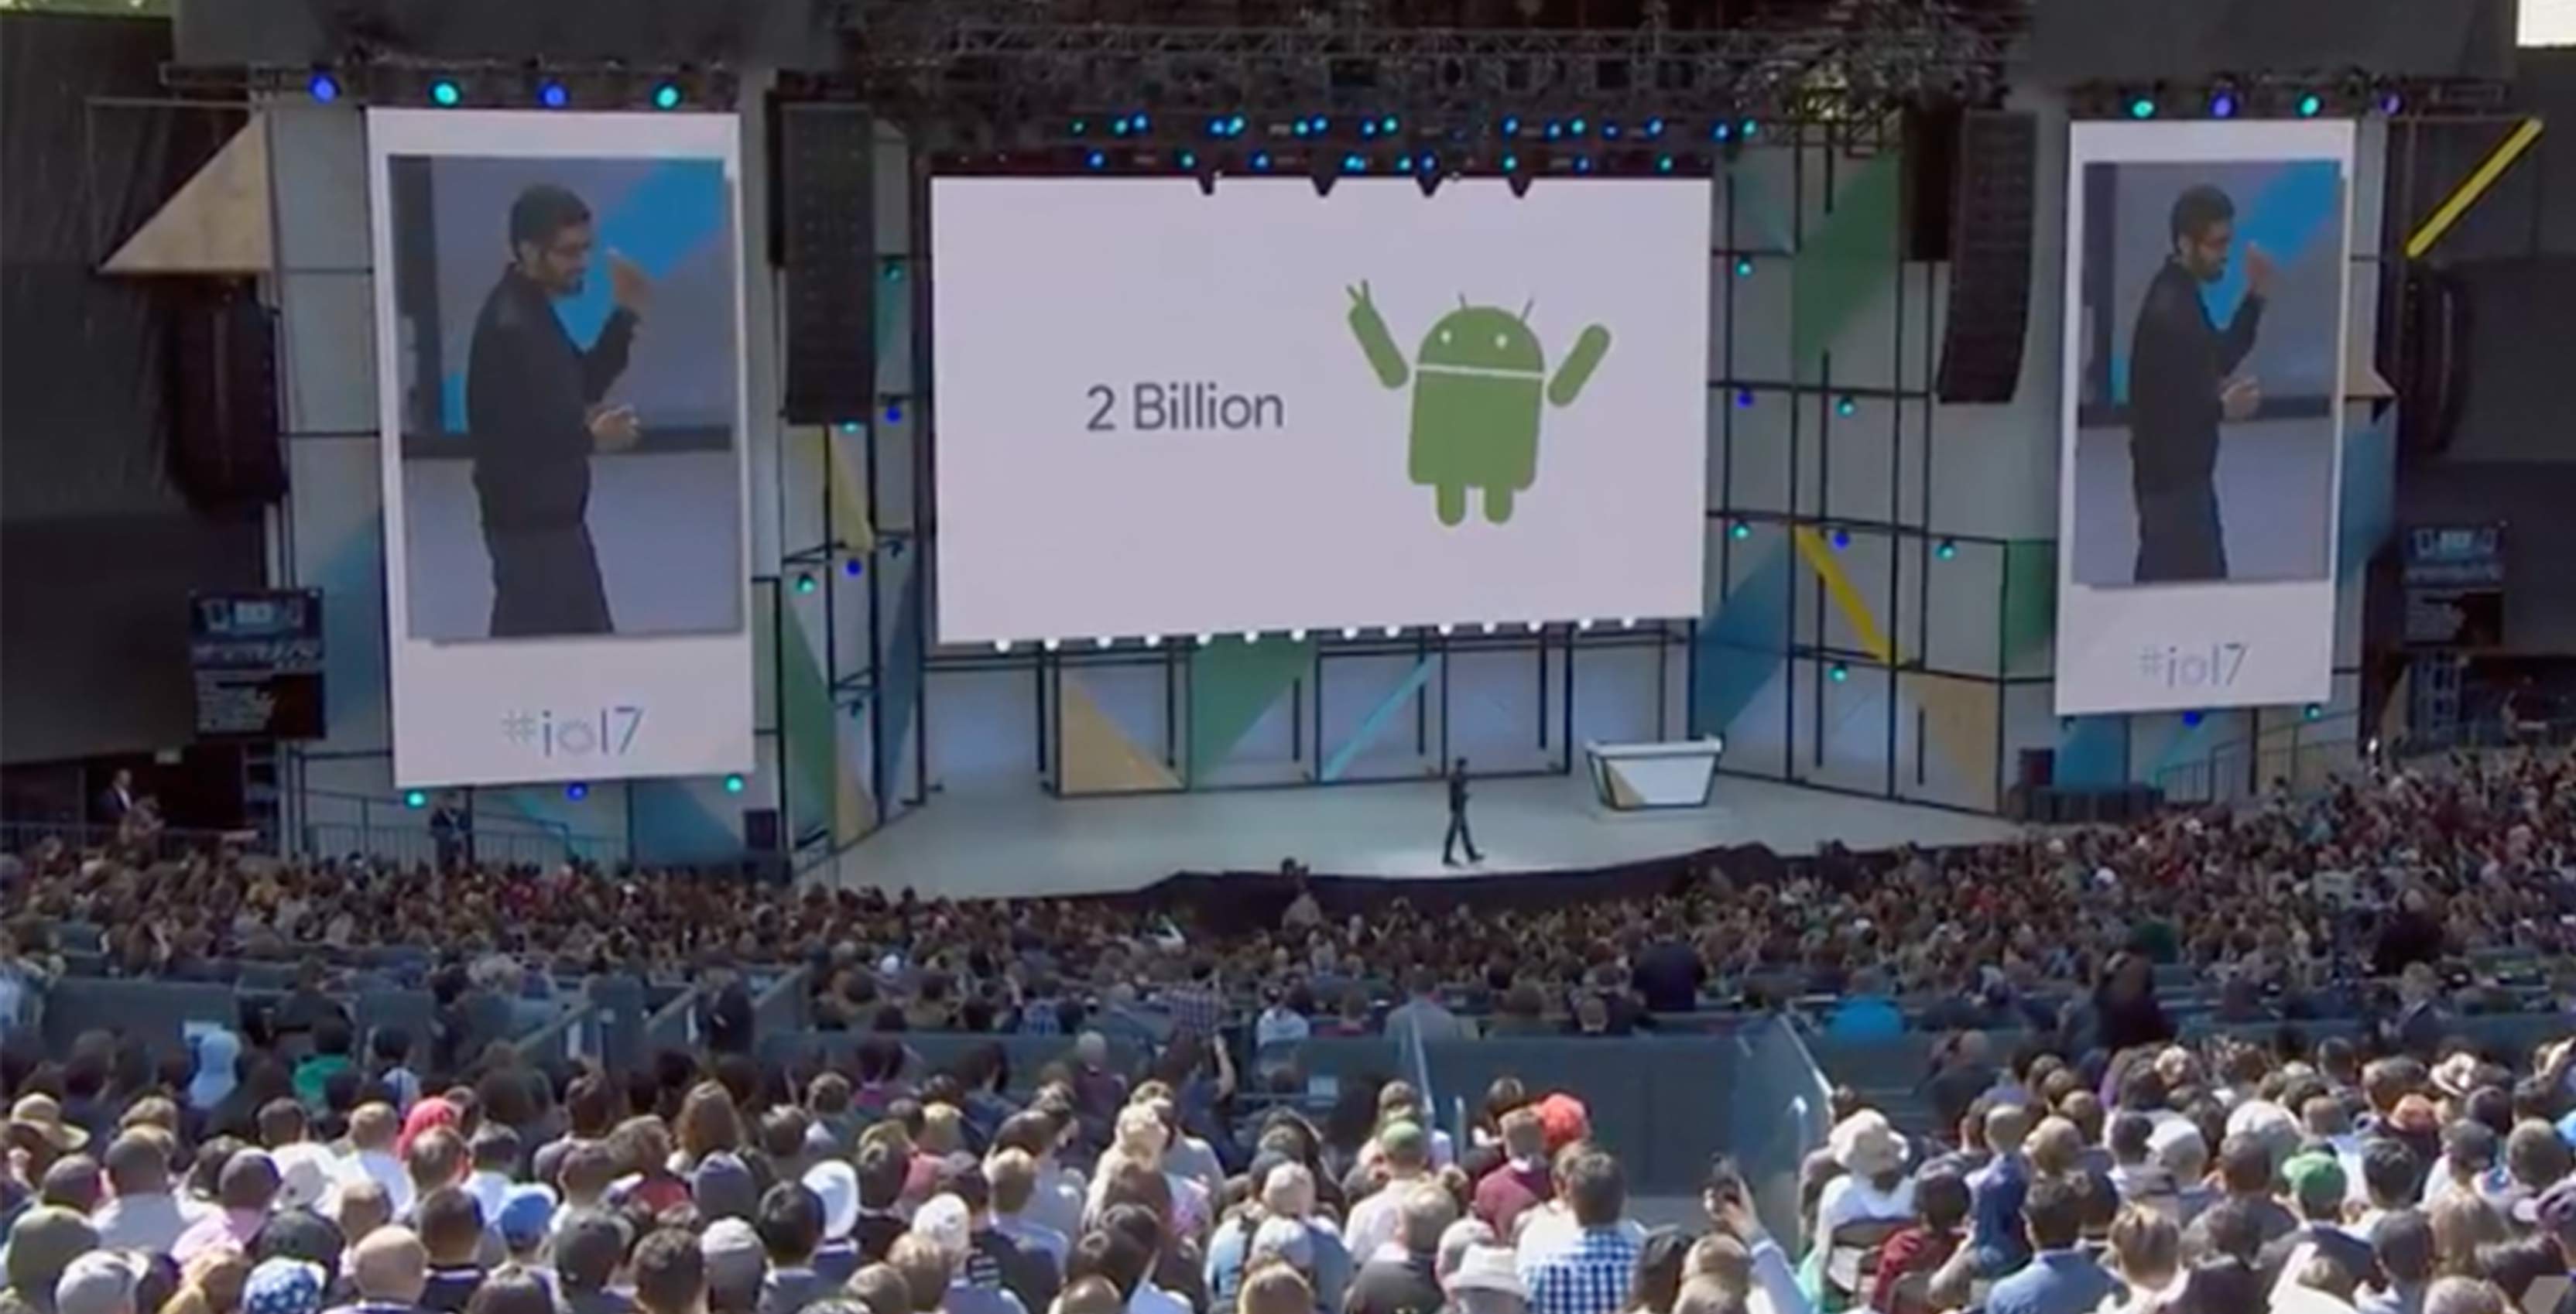 Android userbase